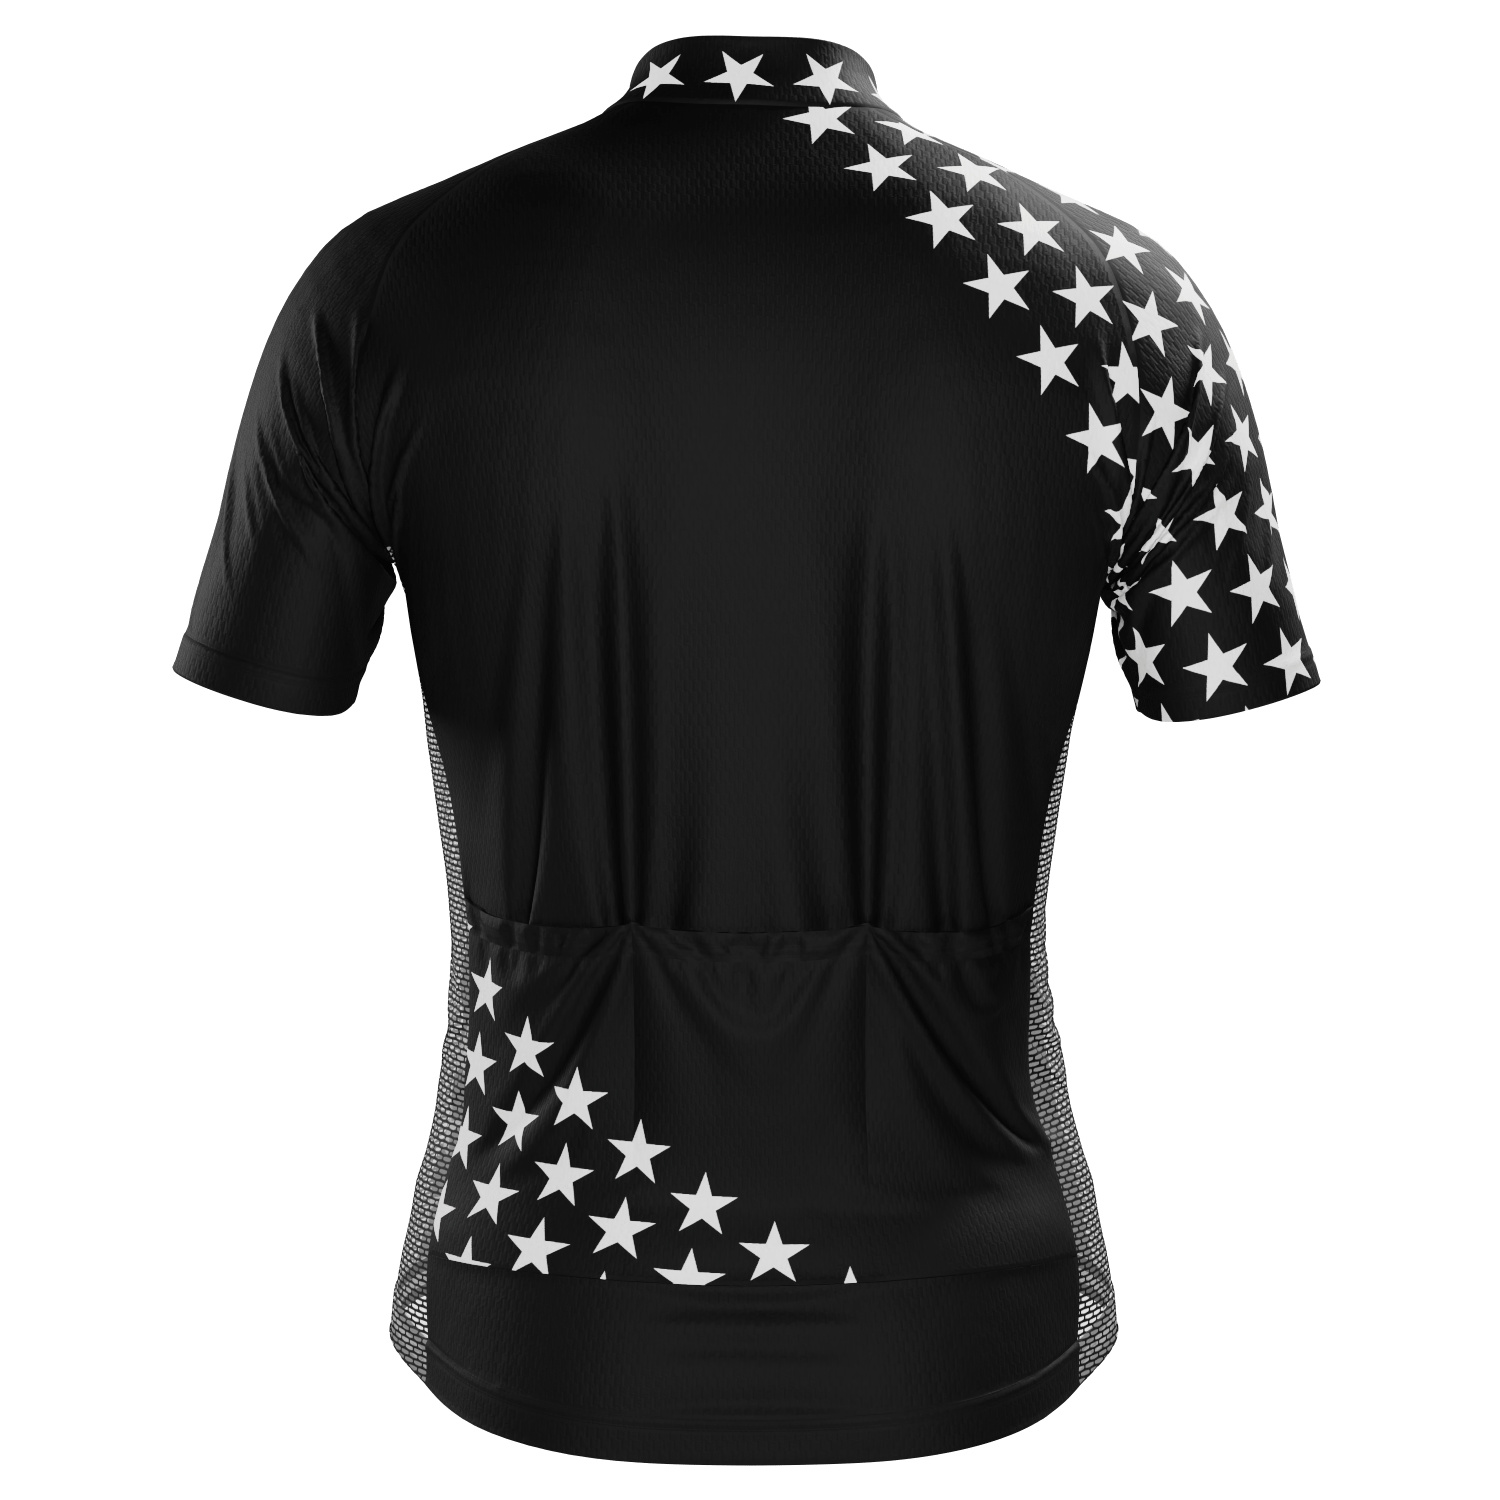 Men's Starred Short Sleeve Cycling Jersey